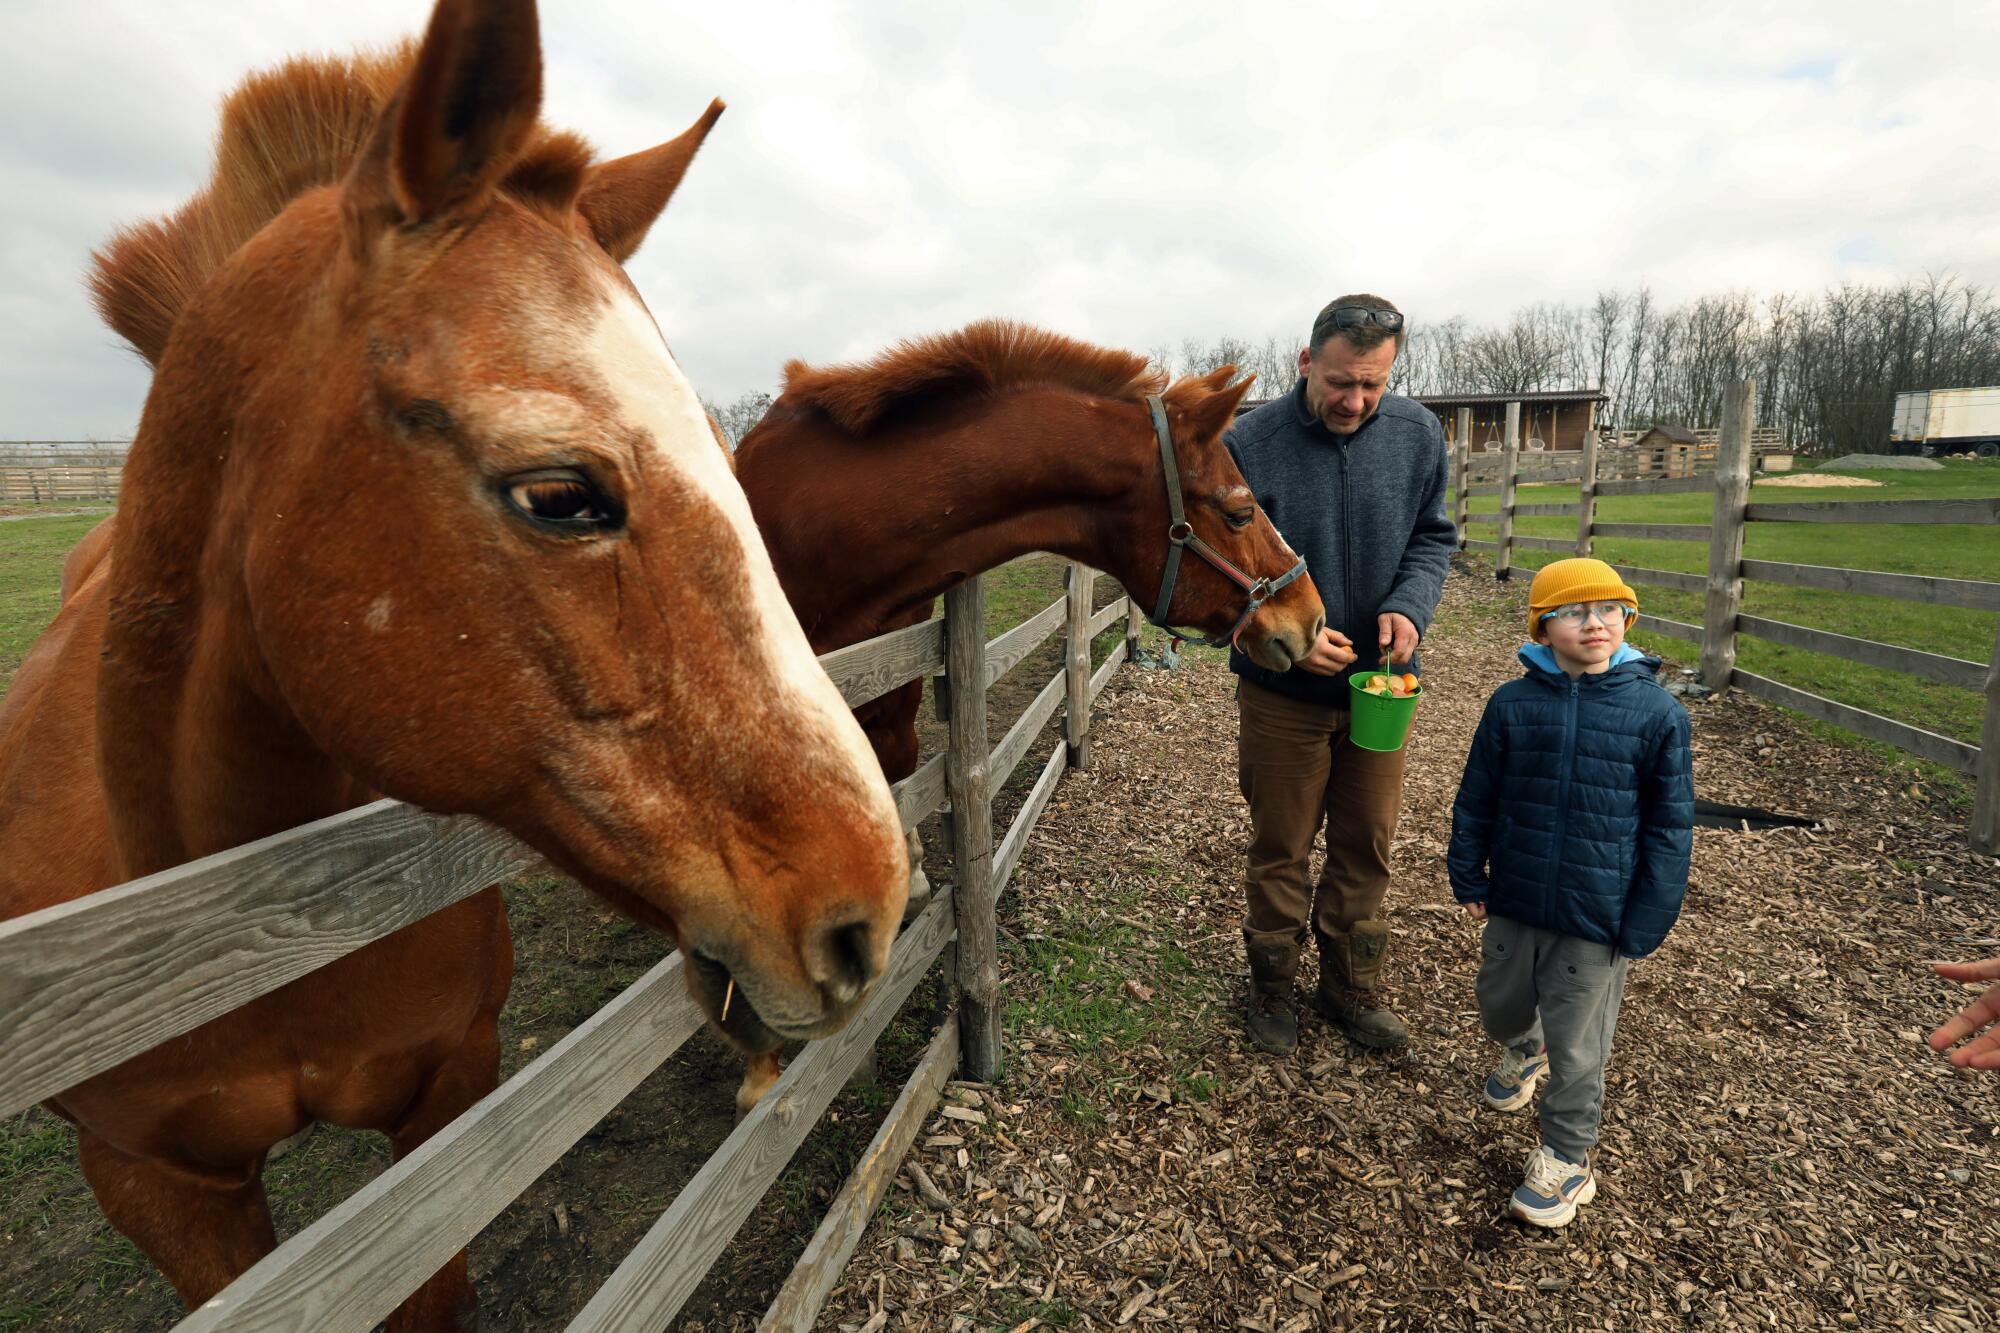 Man and boy next to horses